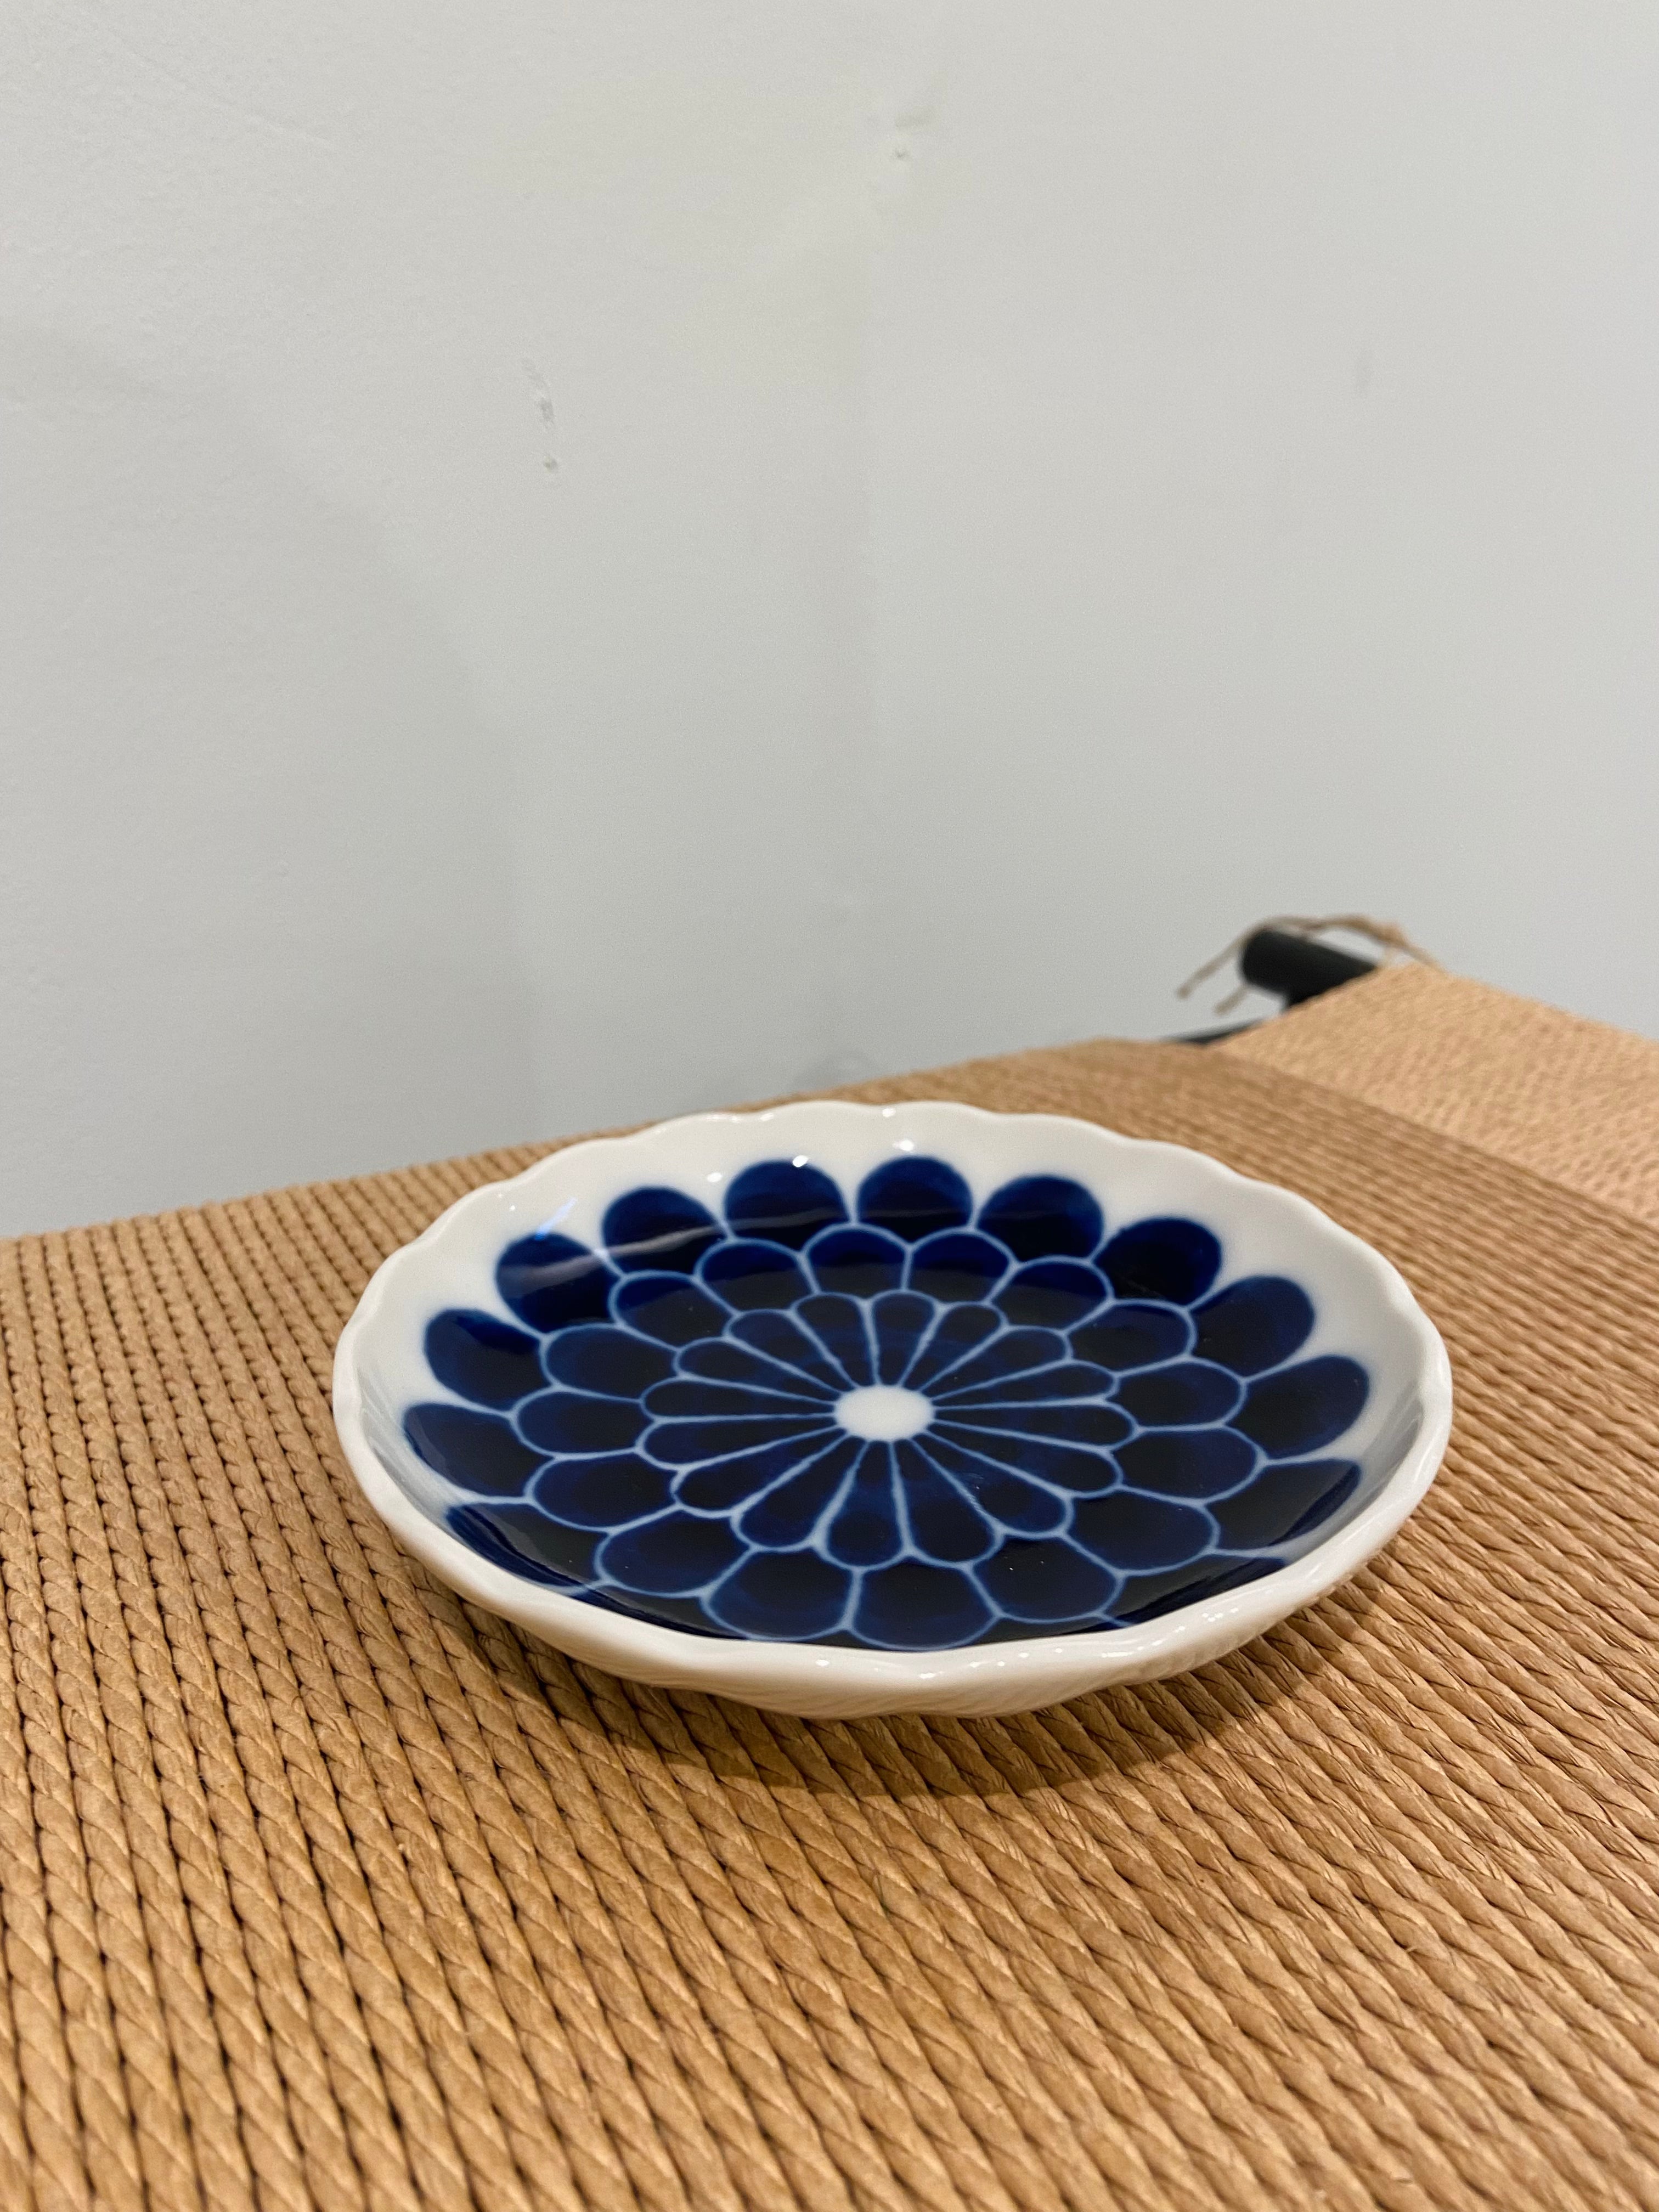 Small plate with blue floral motif